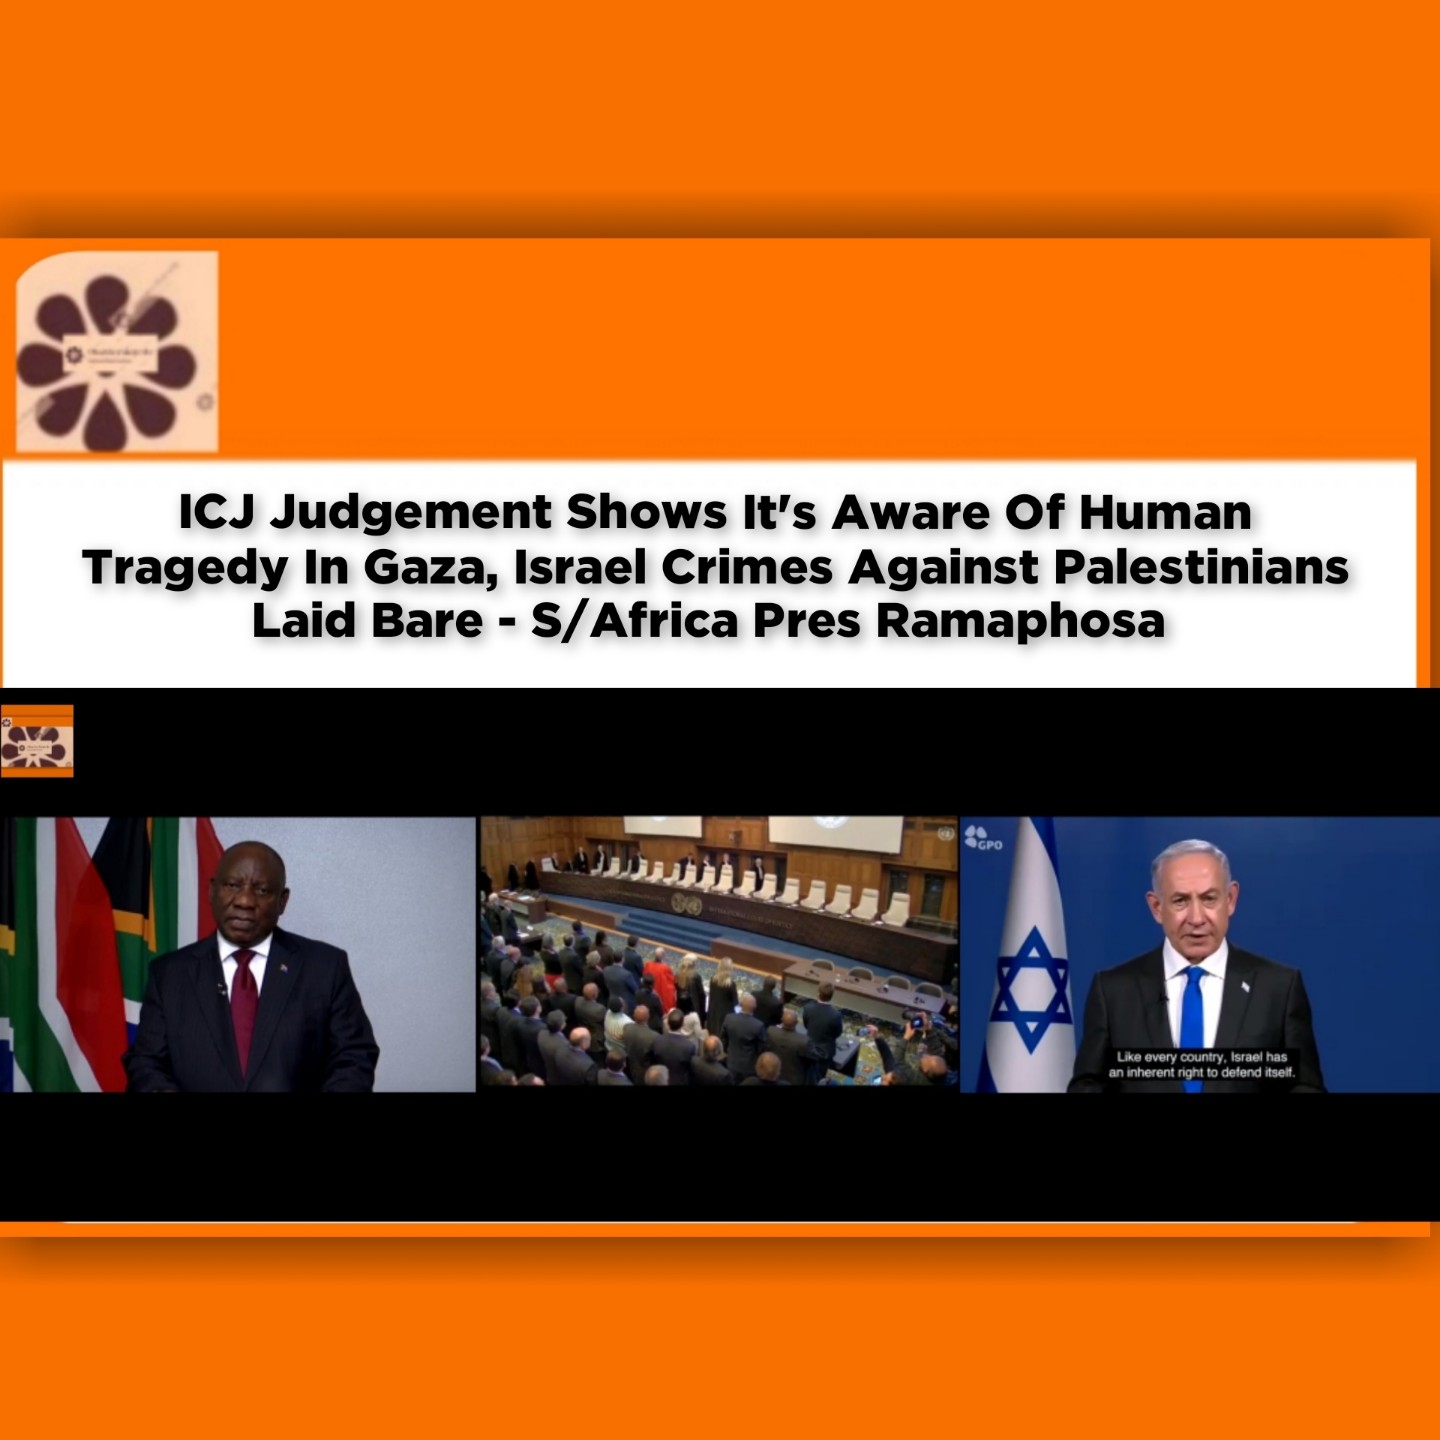 ICJ Judgement Shows It’s Aware Of Human Tragedy In Gaza, Israel Crimes Against Palestinians Laid Bare – S/Africa Pres Ramaphosa